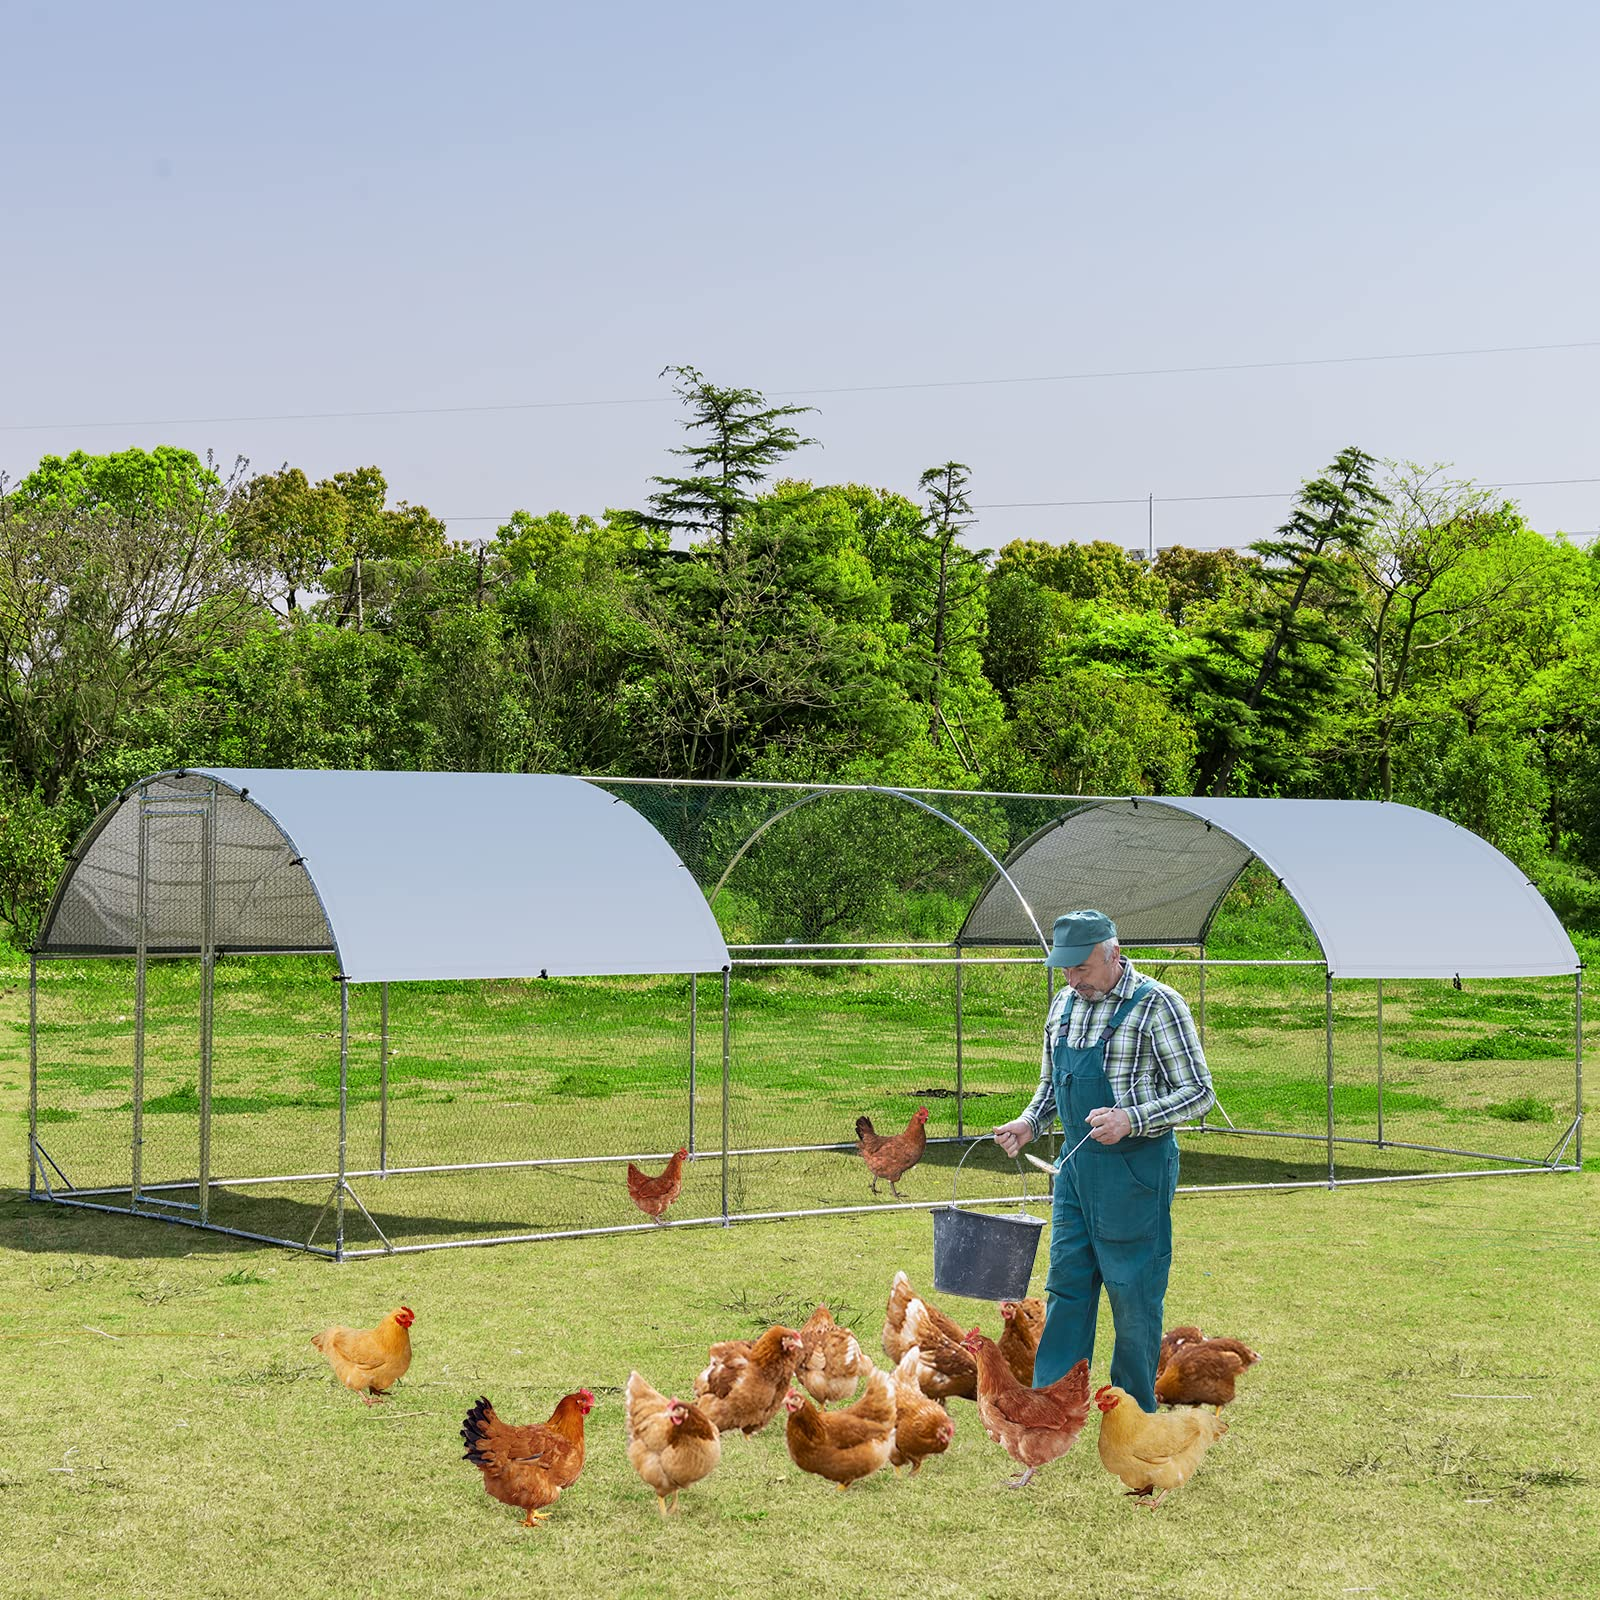 Giantex Large Metal Chicken Coop, Dome Shaped Poultry Cage Hen Run House Rabbits Habitat for Backyard Farm Outdoor